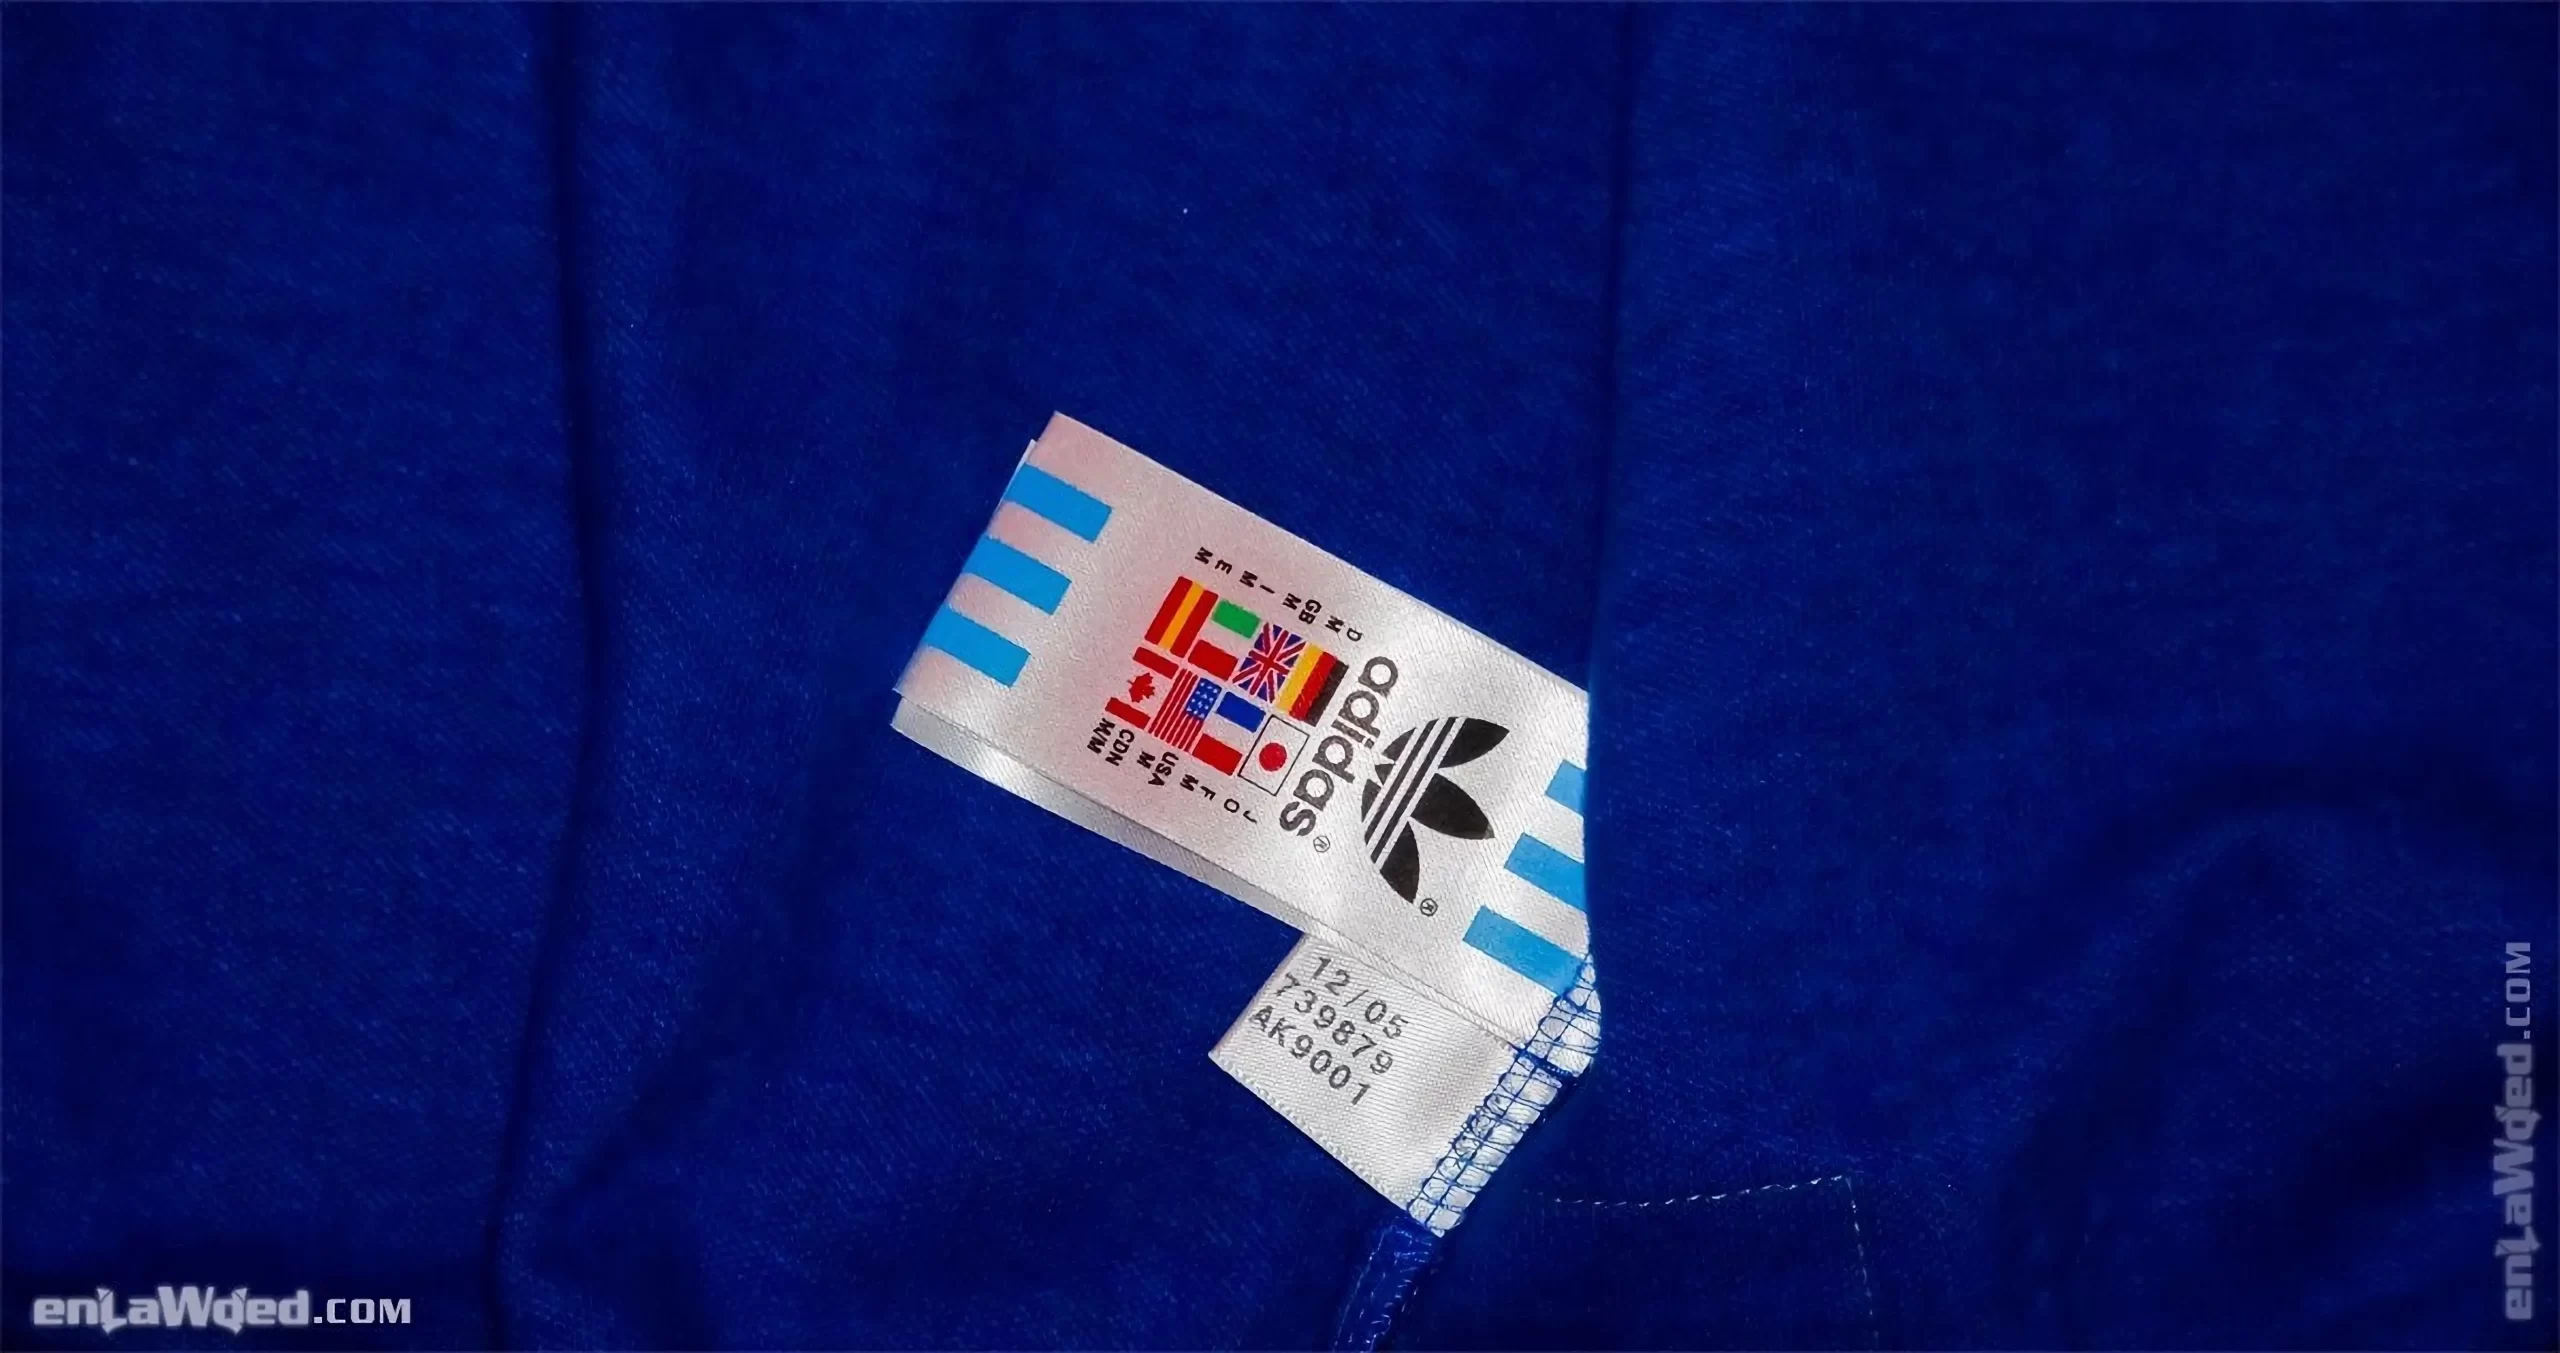 Adidas tag of the England 1966 jacket, with the month and year of fabrication: 12/2005